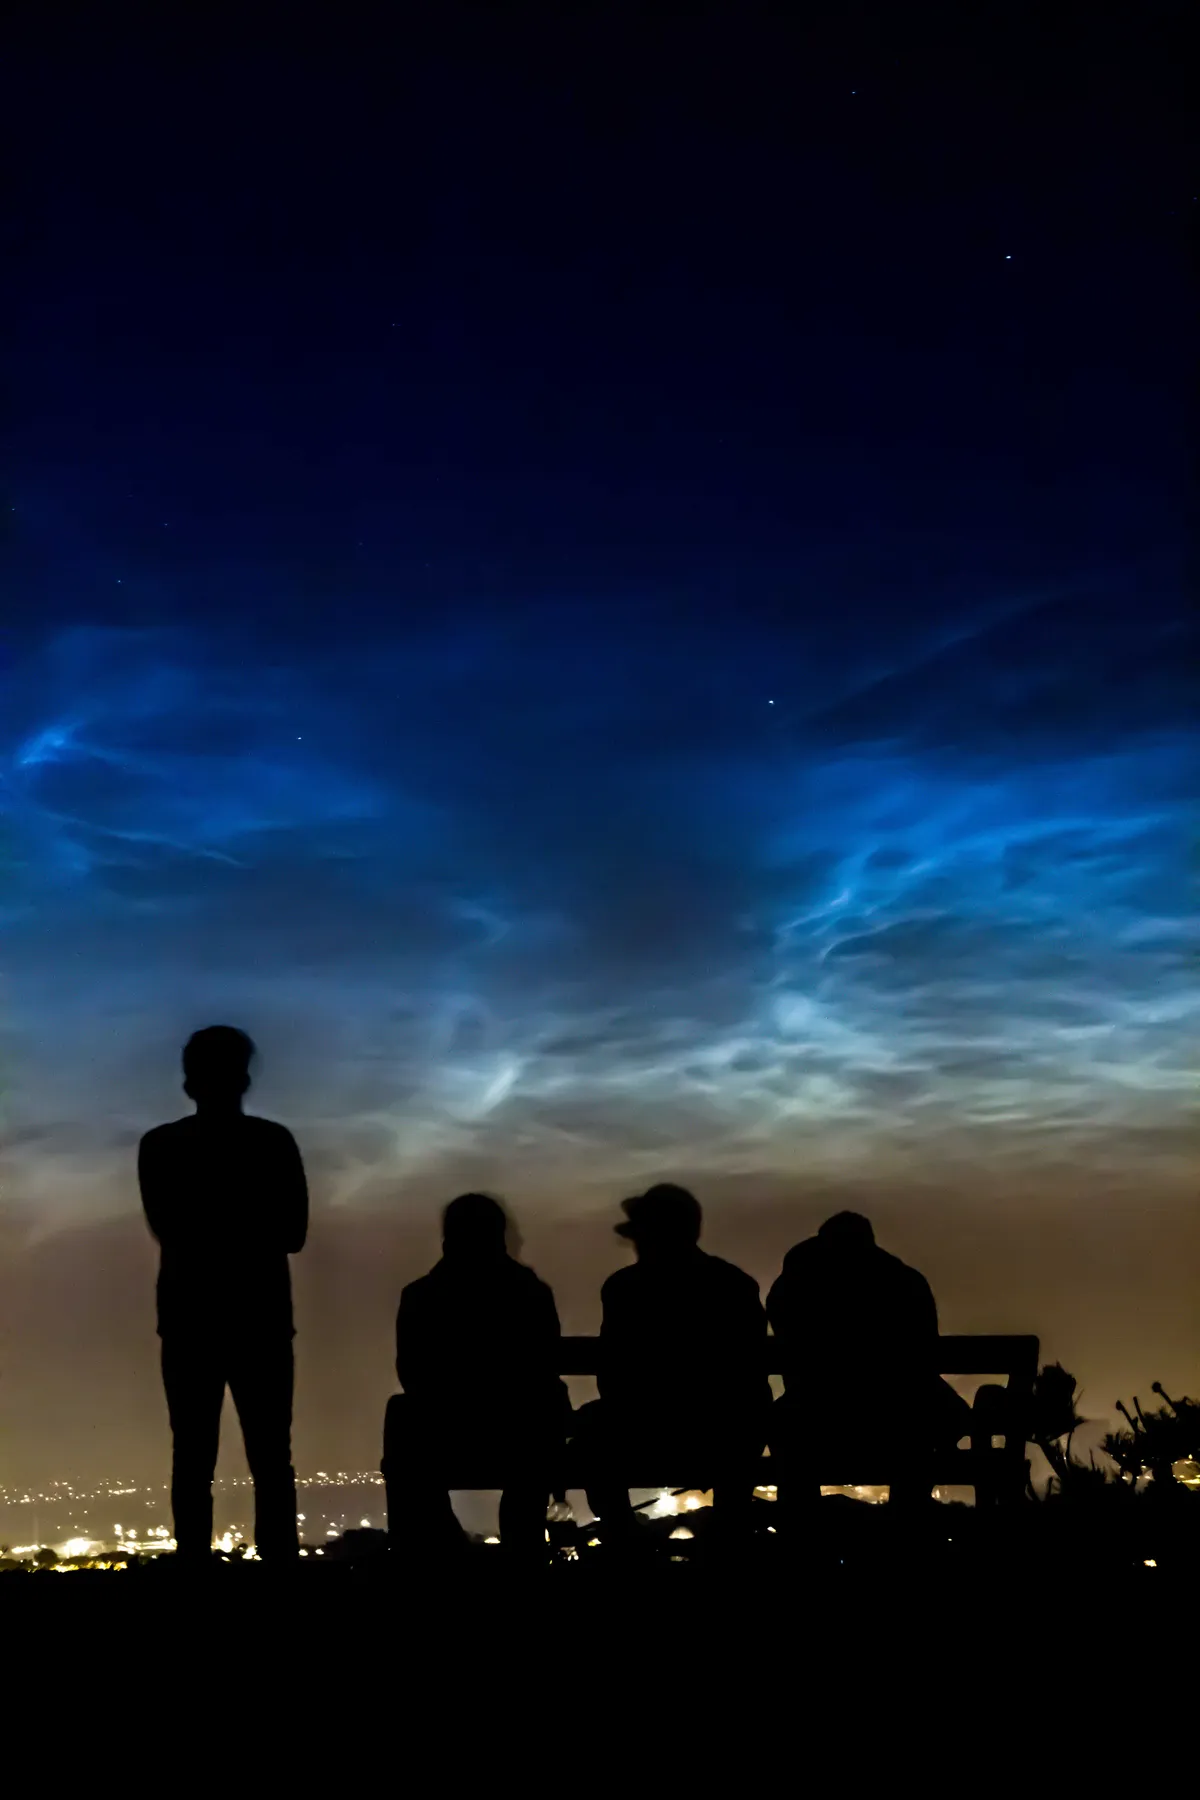 Noctilucent Frodsham by Andrew Davies, Frodsham Hill, Cheshire, UK. Equipment: Canon 600D, 28-105mm